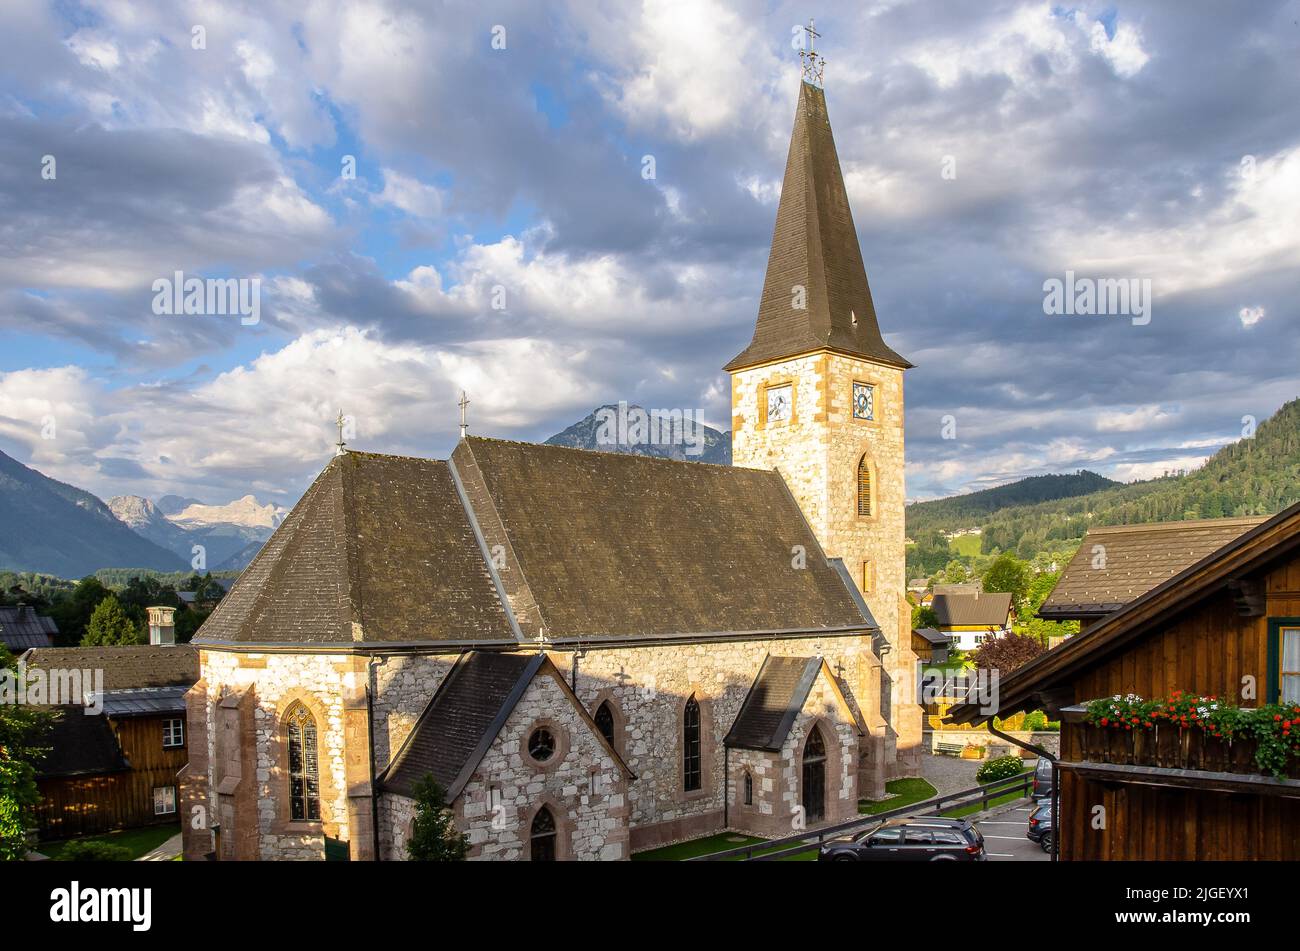 Parish Church of St. Ägid at Altaussee - traditions suggest that this church was built towards the end of the 12th century. Stock Photo